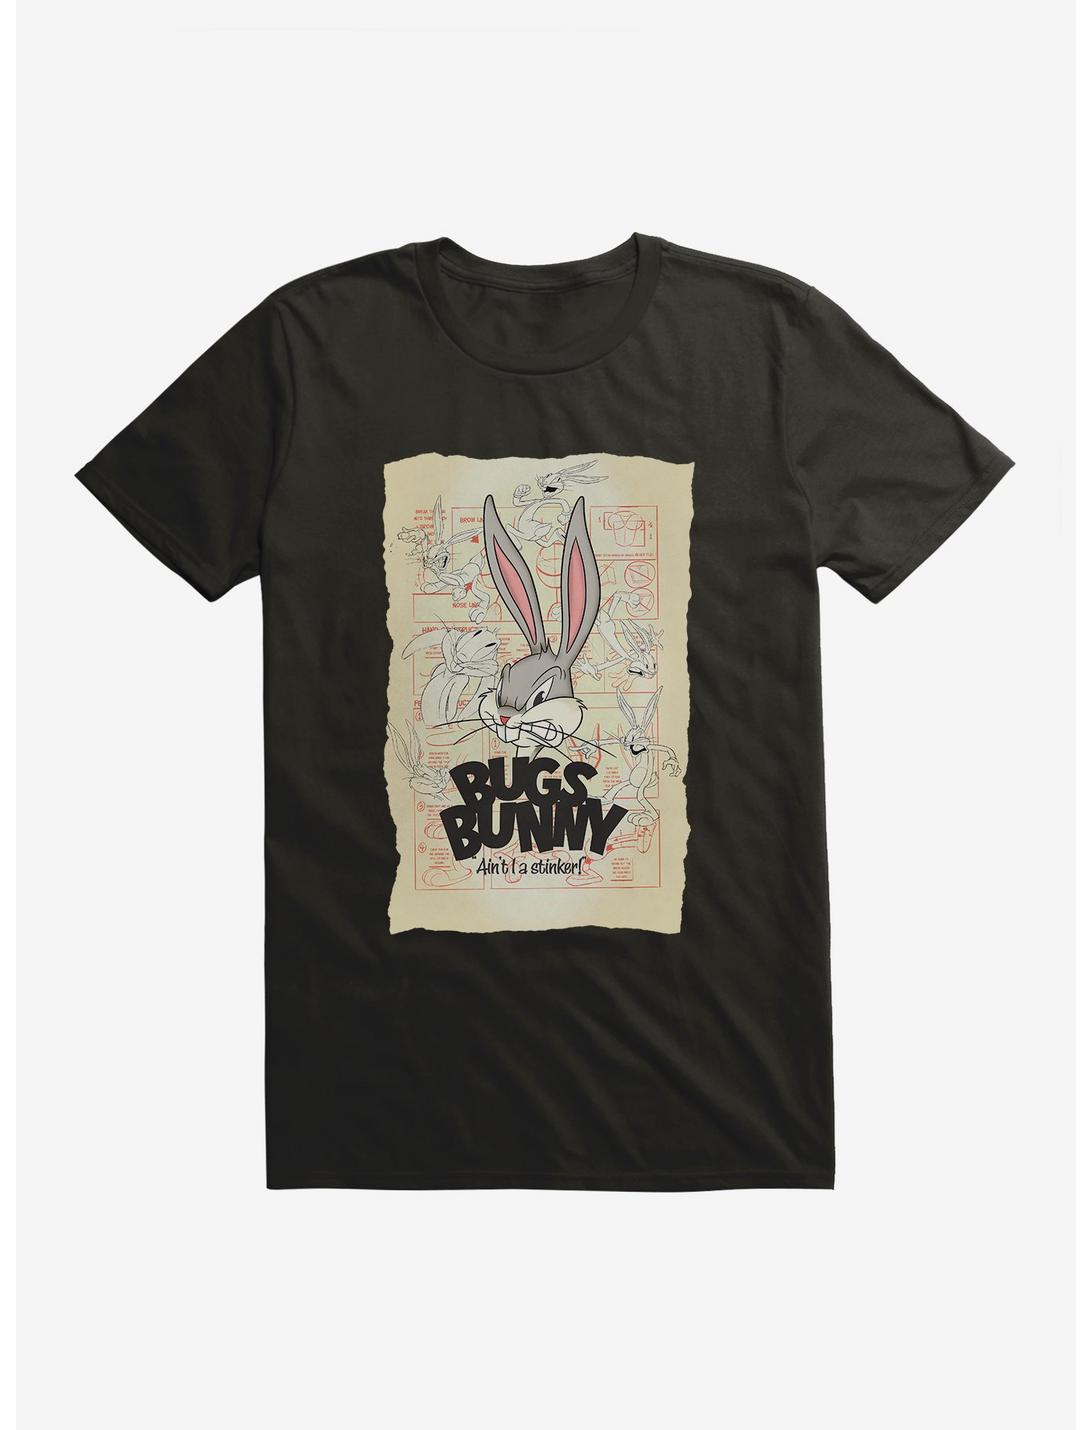 Looney Tunes Faces Of Bugs Bunny T-Shirt, BLACK, hi-res